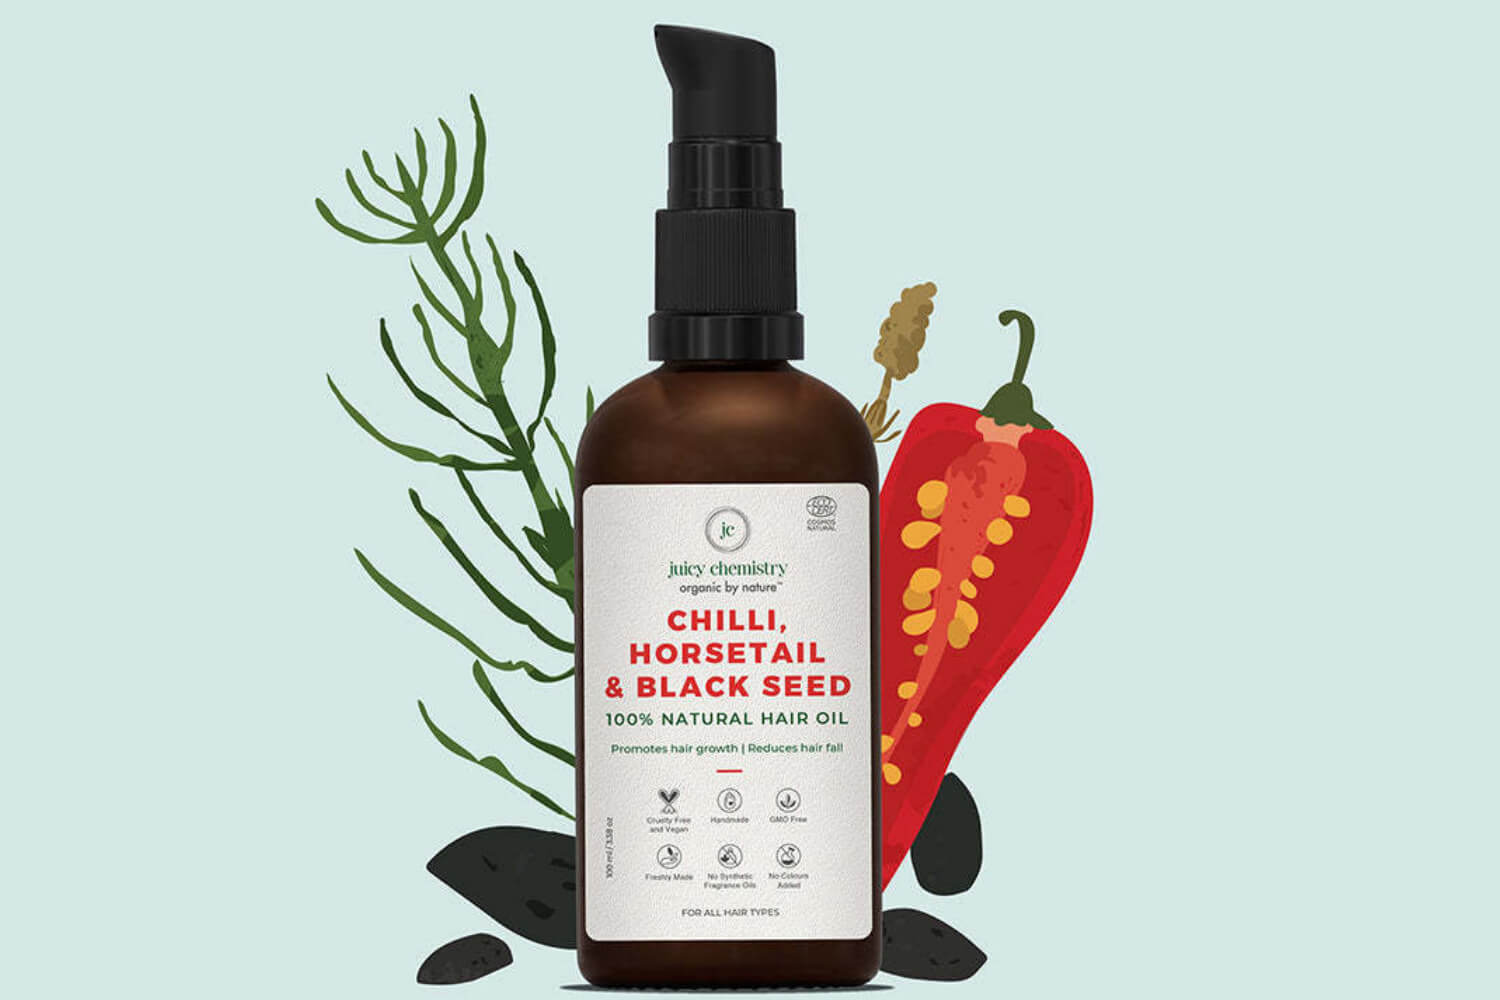 Juicy Chemistry’s Chili, Horsetail, and Black seed oil